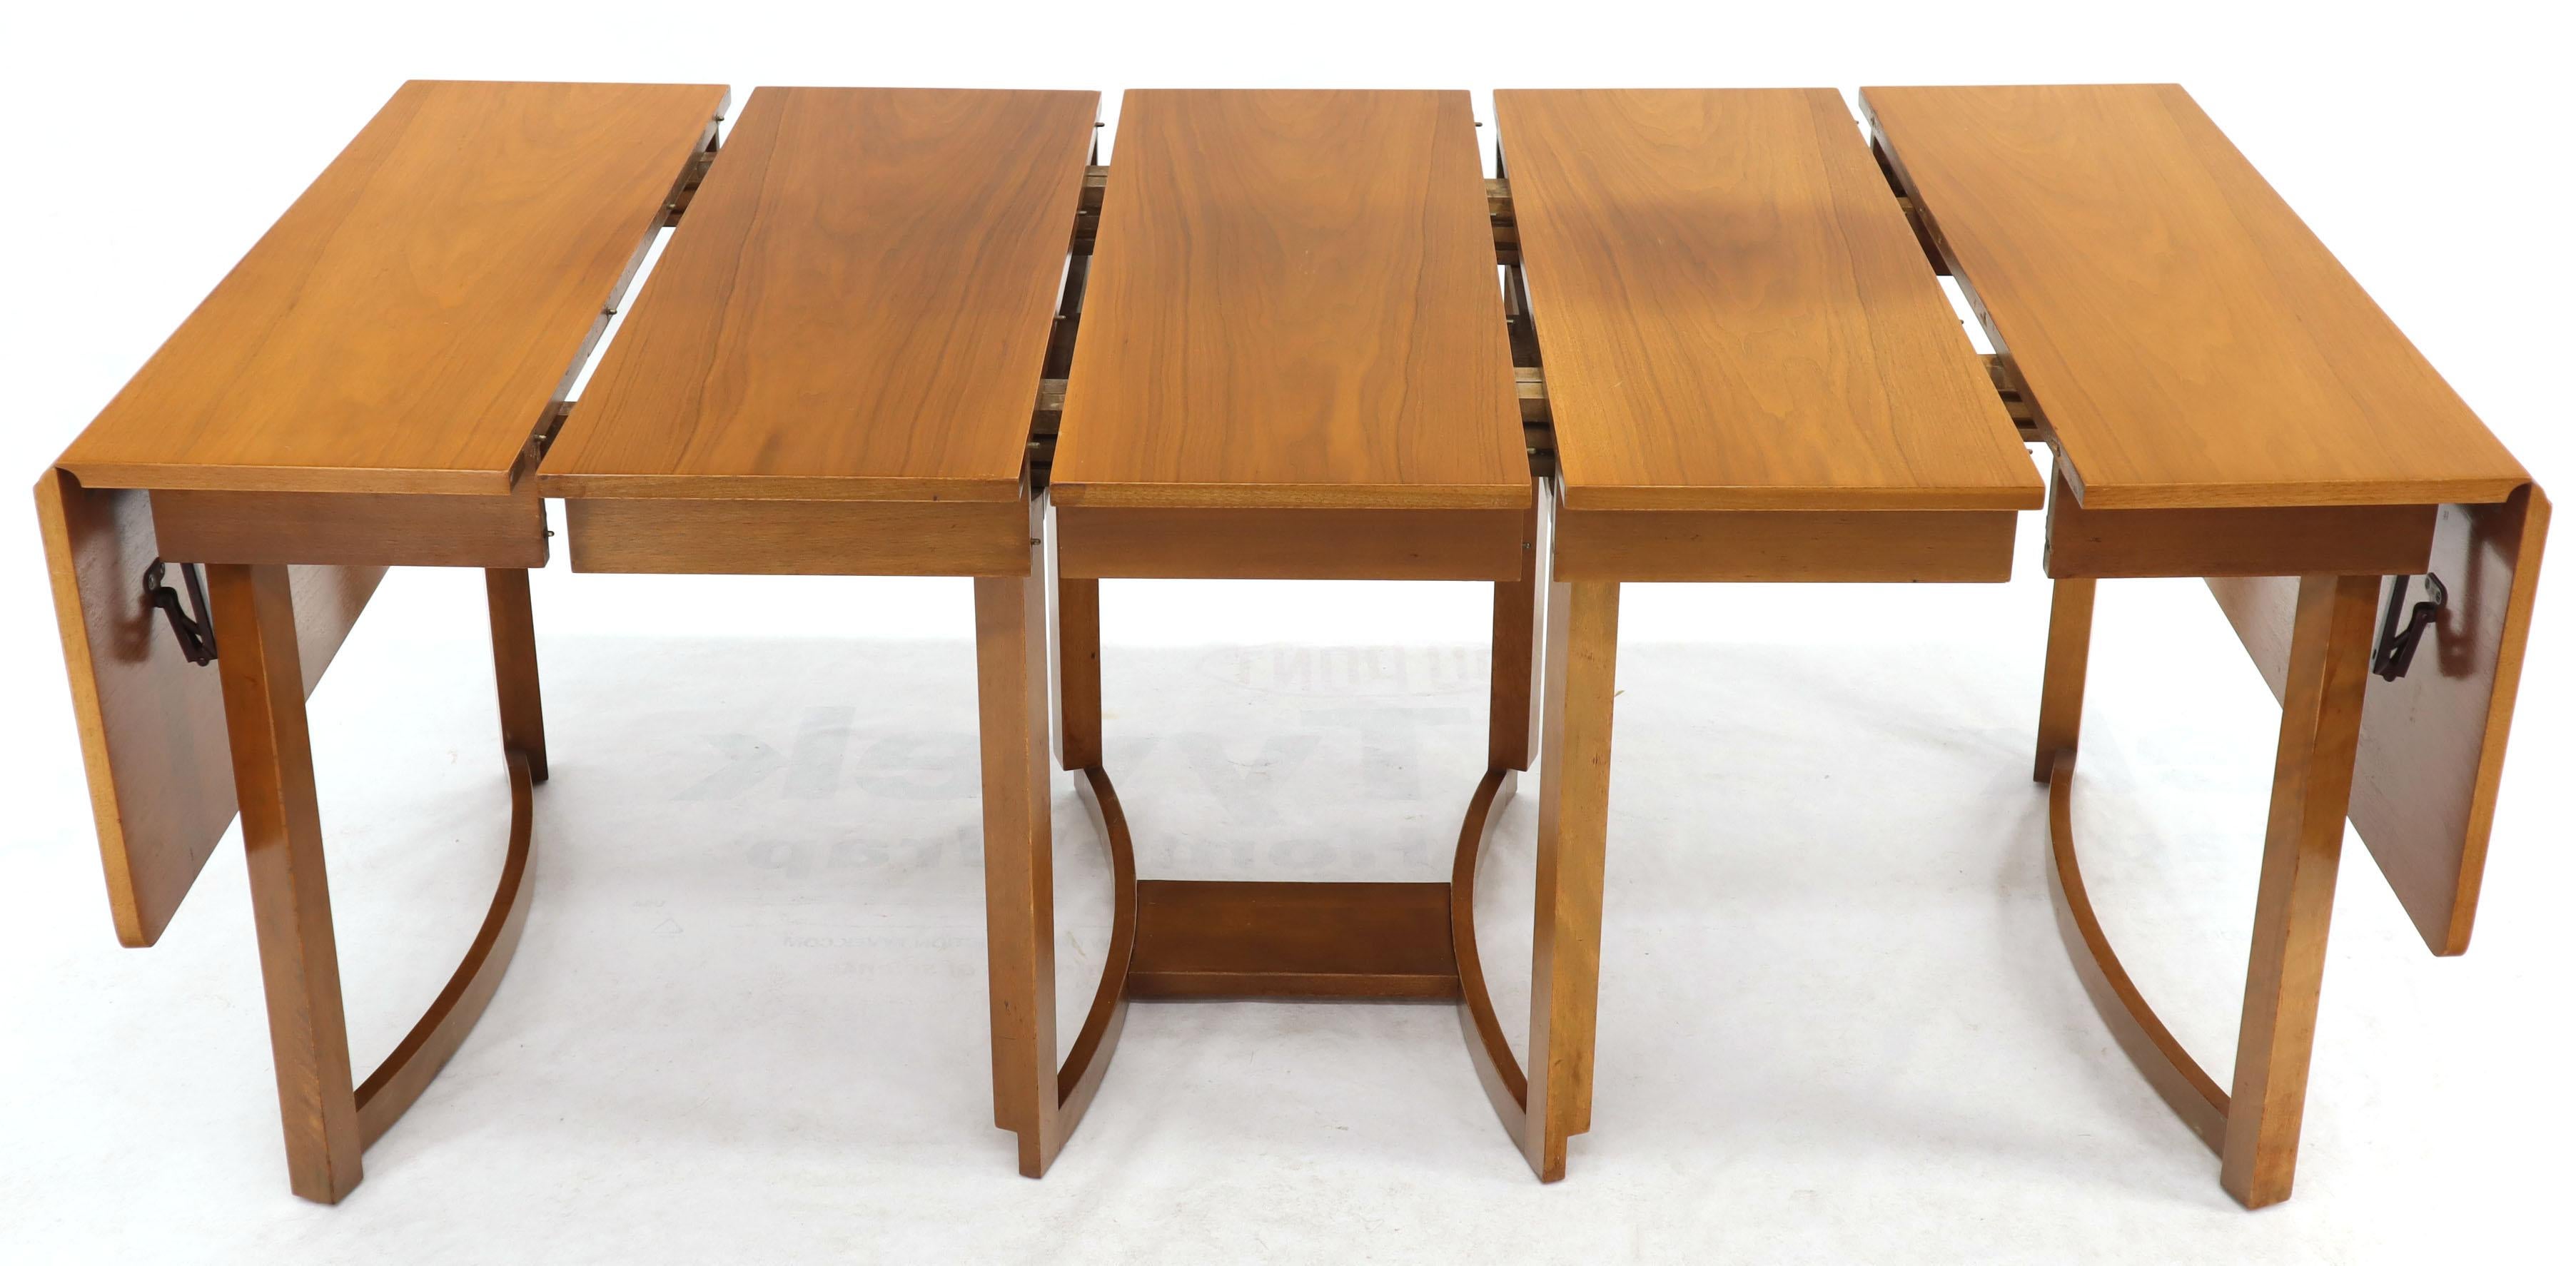 Midcentury Light Walnut Drop Leaf Expandable Dining Table, Three Leafs Boards im Angebot 5